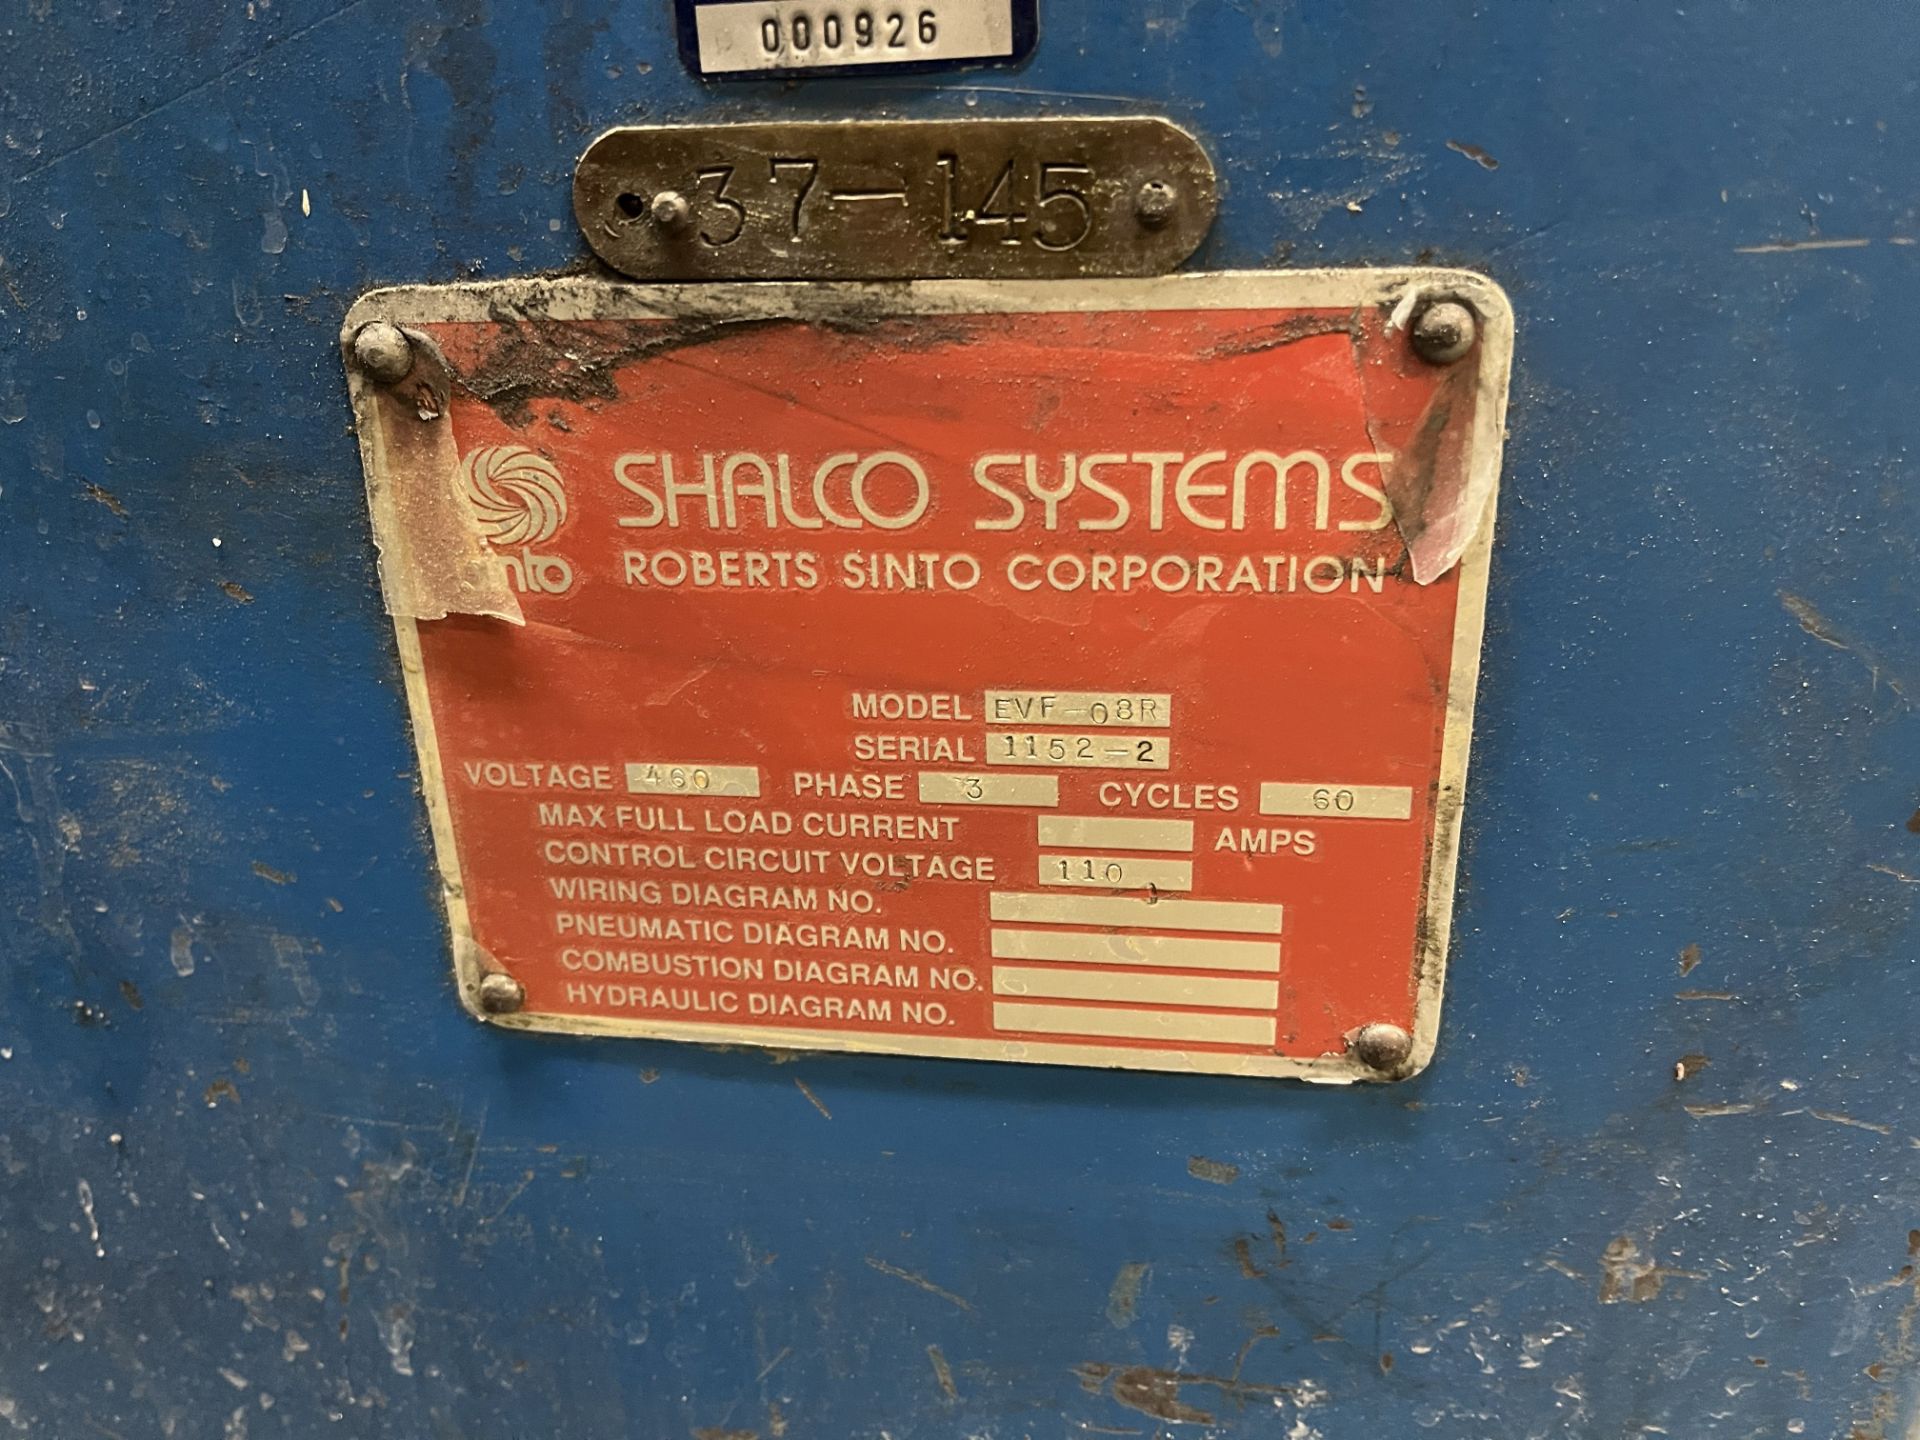 SHALCO SYSTEMS MODEL EVF-08R VIBRATORY PARTS FINISHER; S/N 1152-2, 5 CUBIC FOOT, FULL ENCLOSURE, - Image 11 of 11